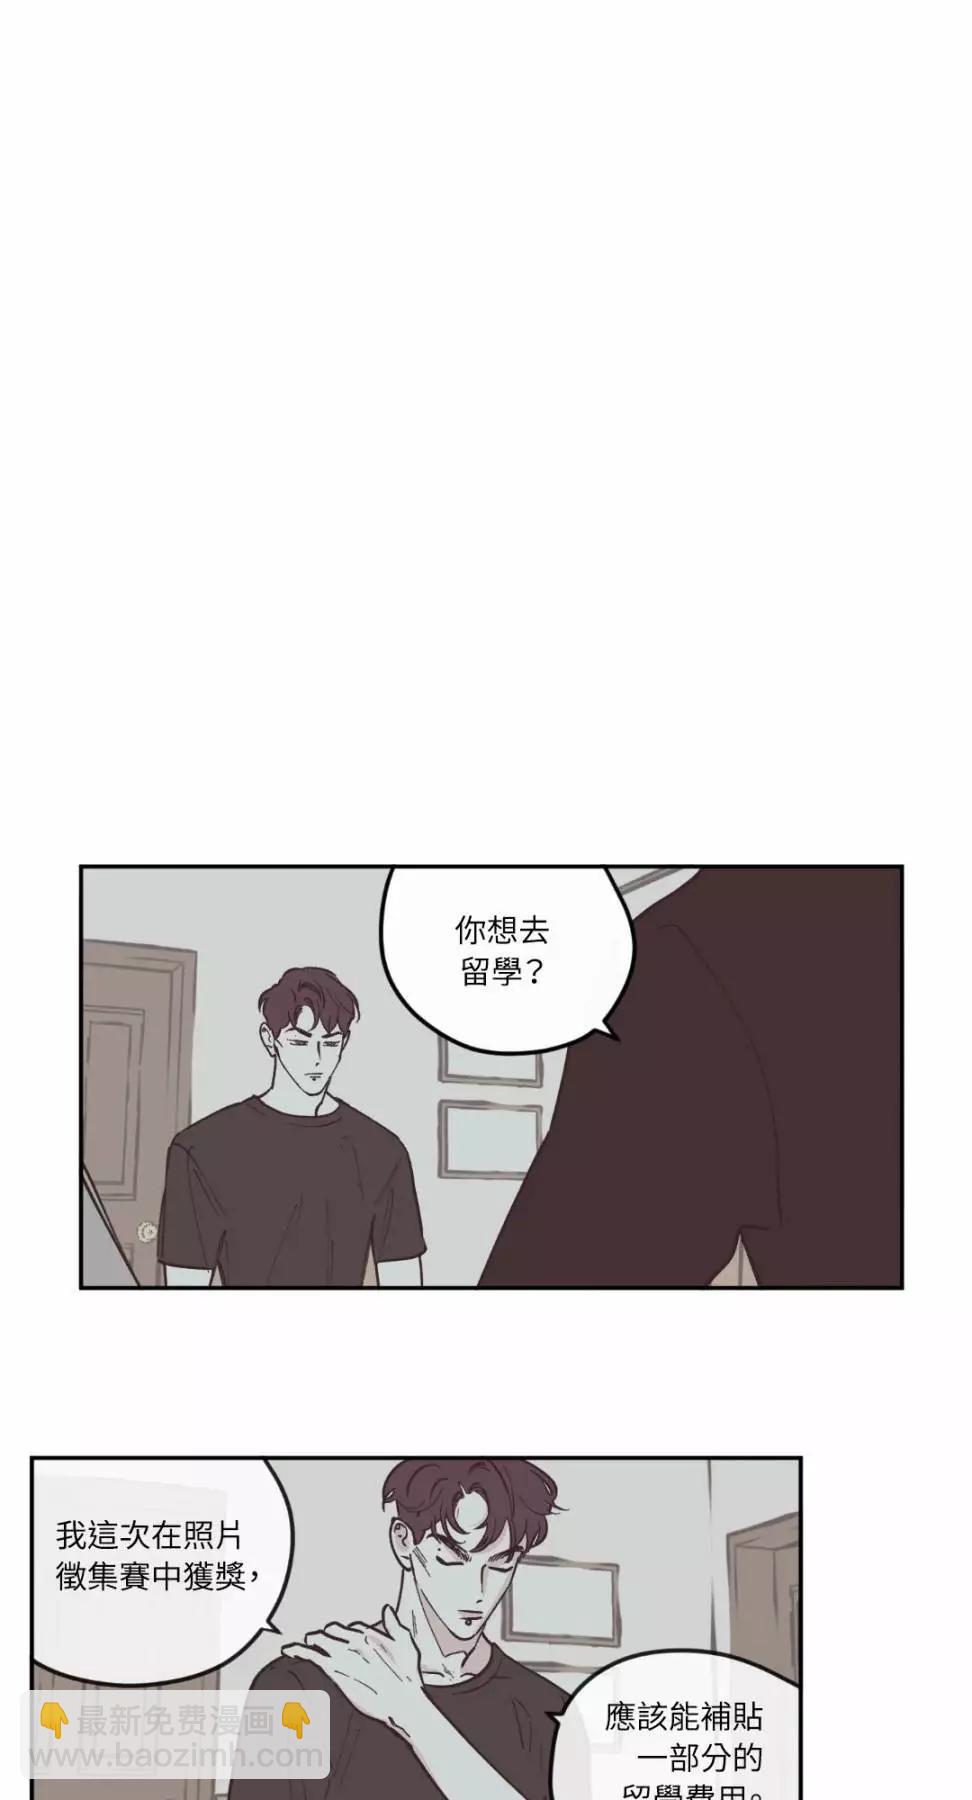 Clean Up百分百 - 第56话 - 4